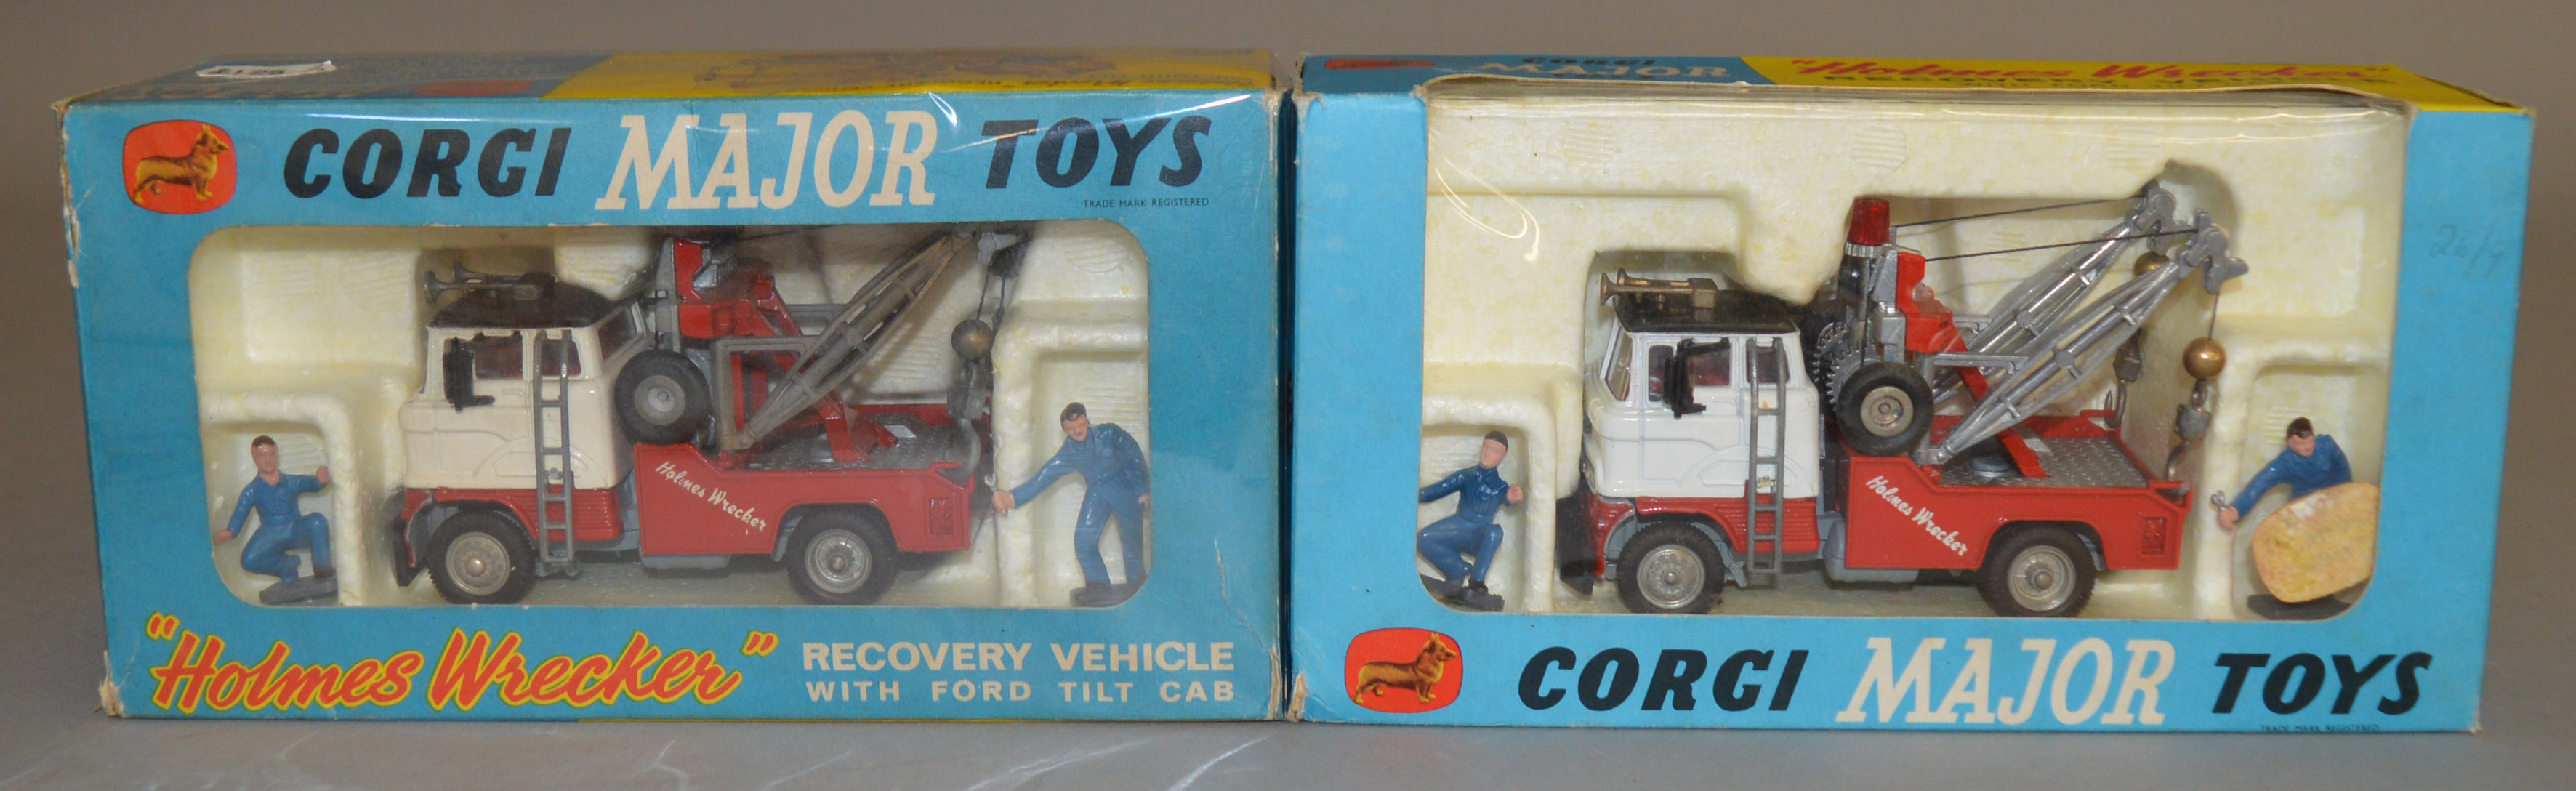 2 Corgi Toys 1142 'Holmes Wrecker' Recovery Vehicles with Ford Tilt Cab, both models appear G/VG